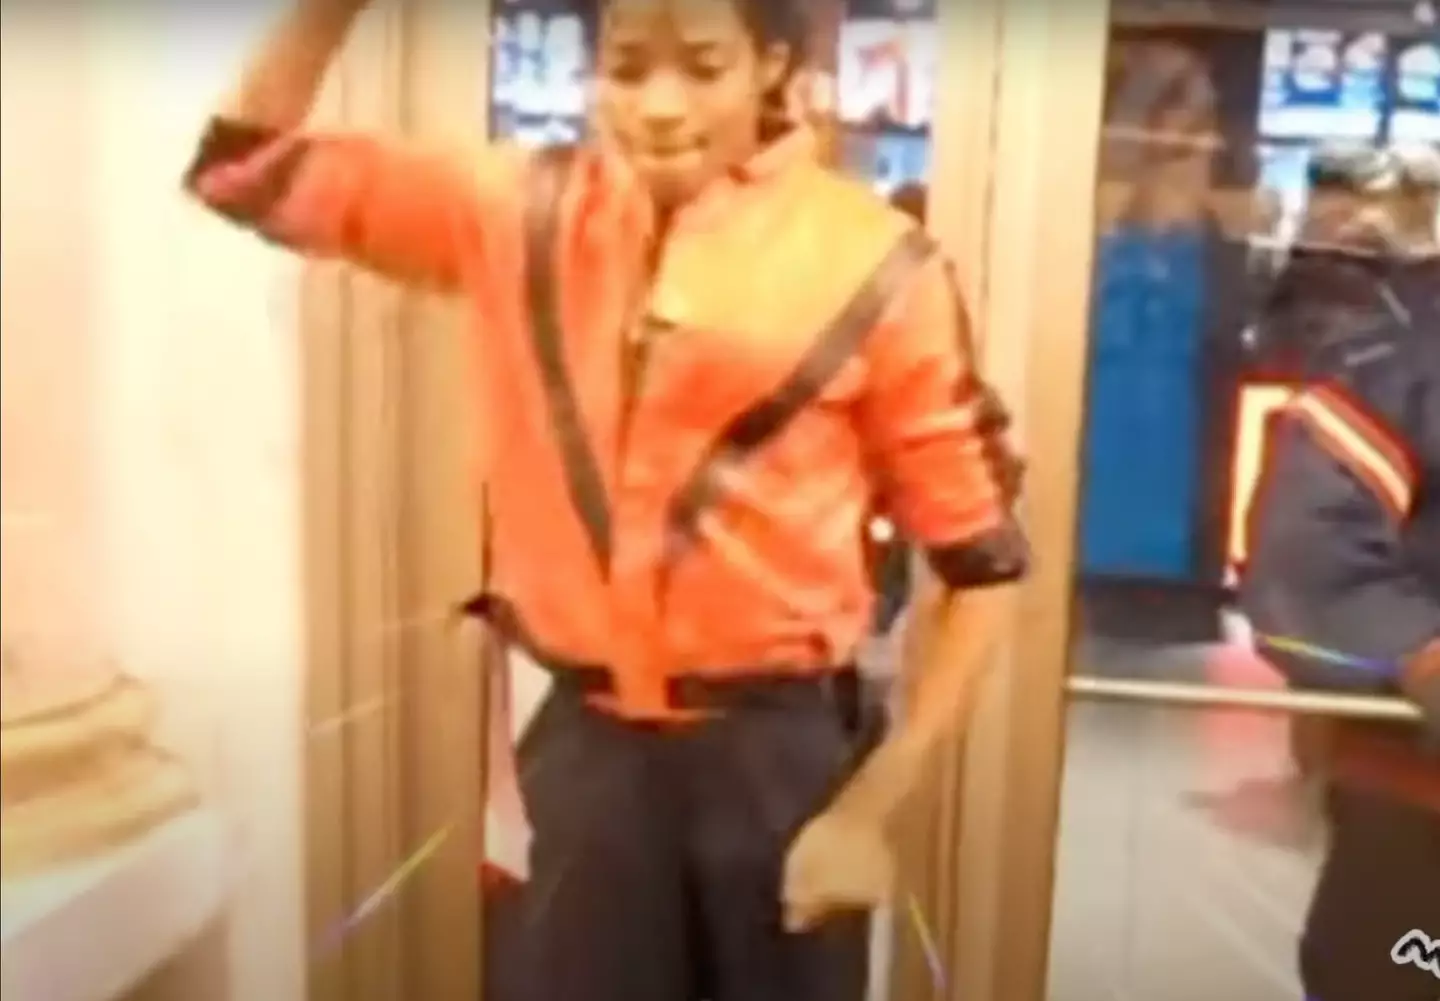 Neely had impersonated MJ since as early as 2009.